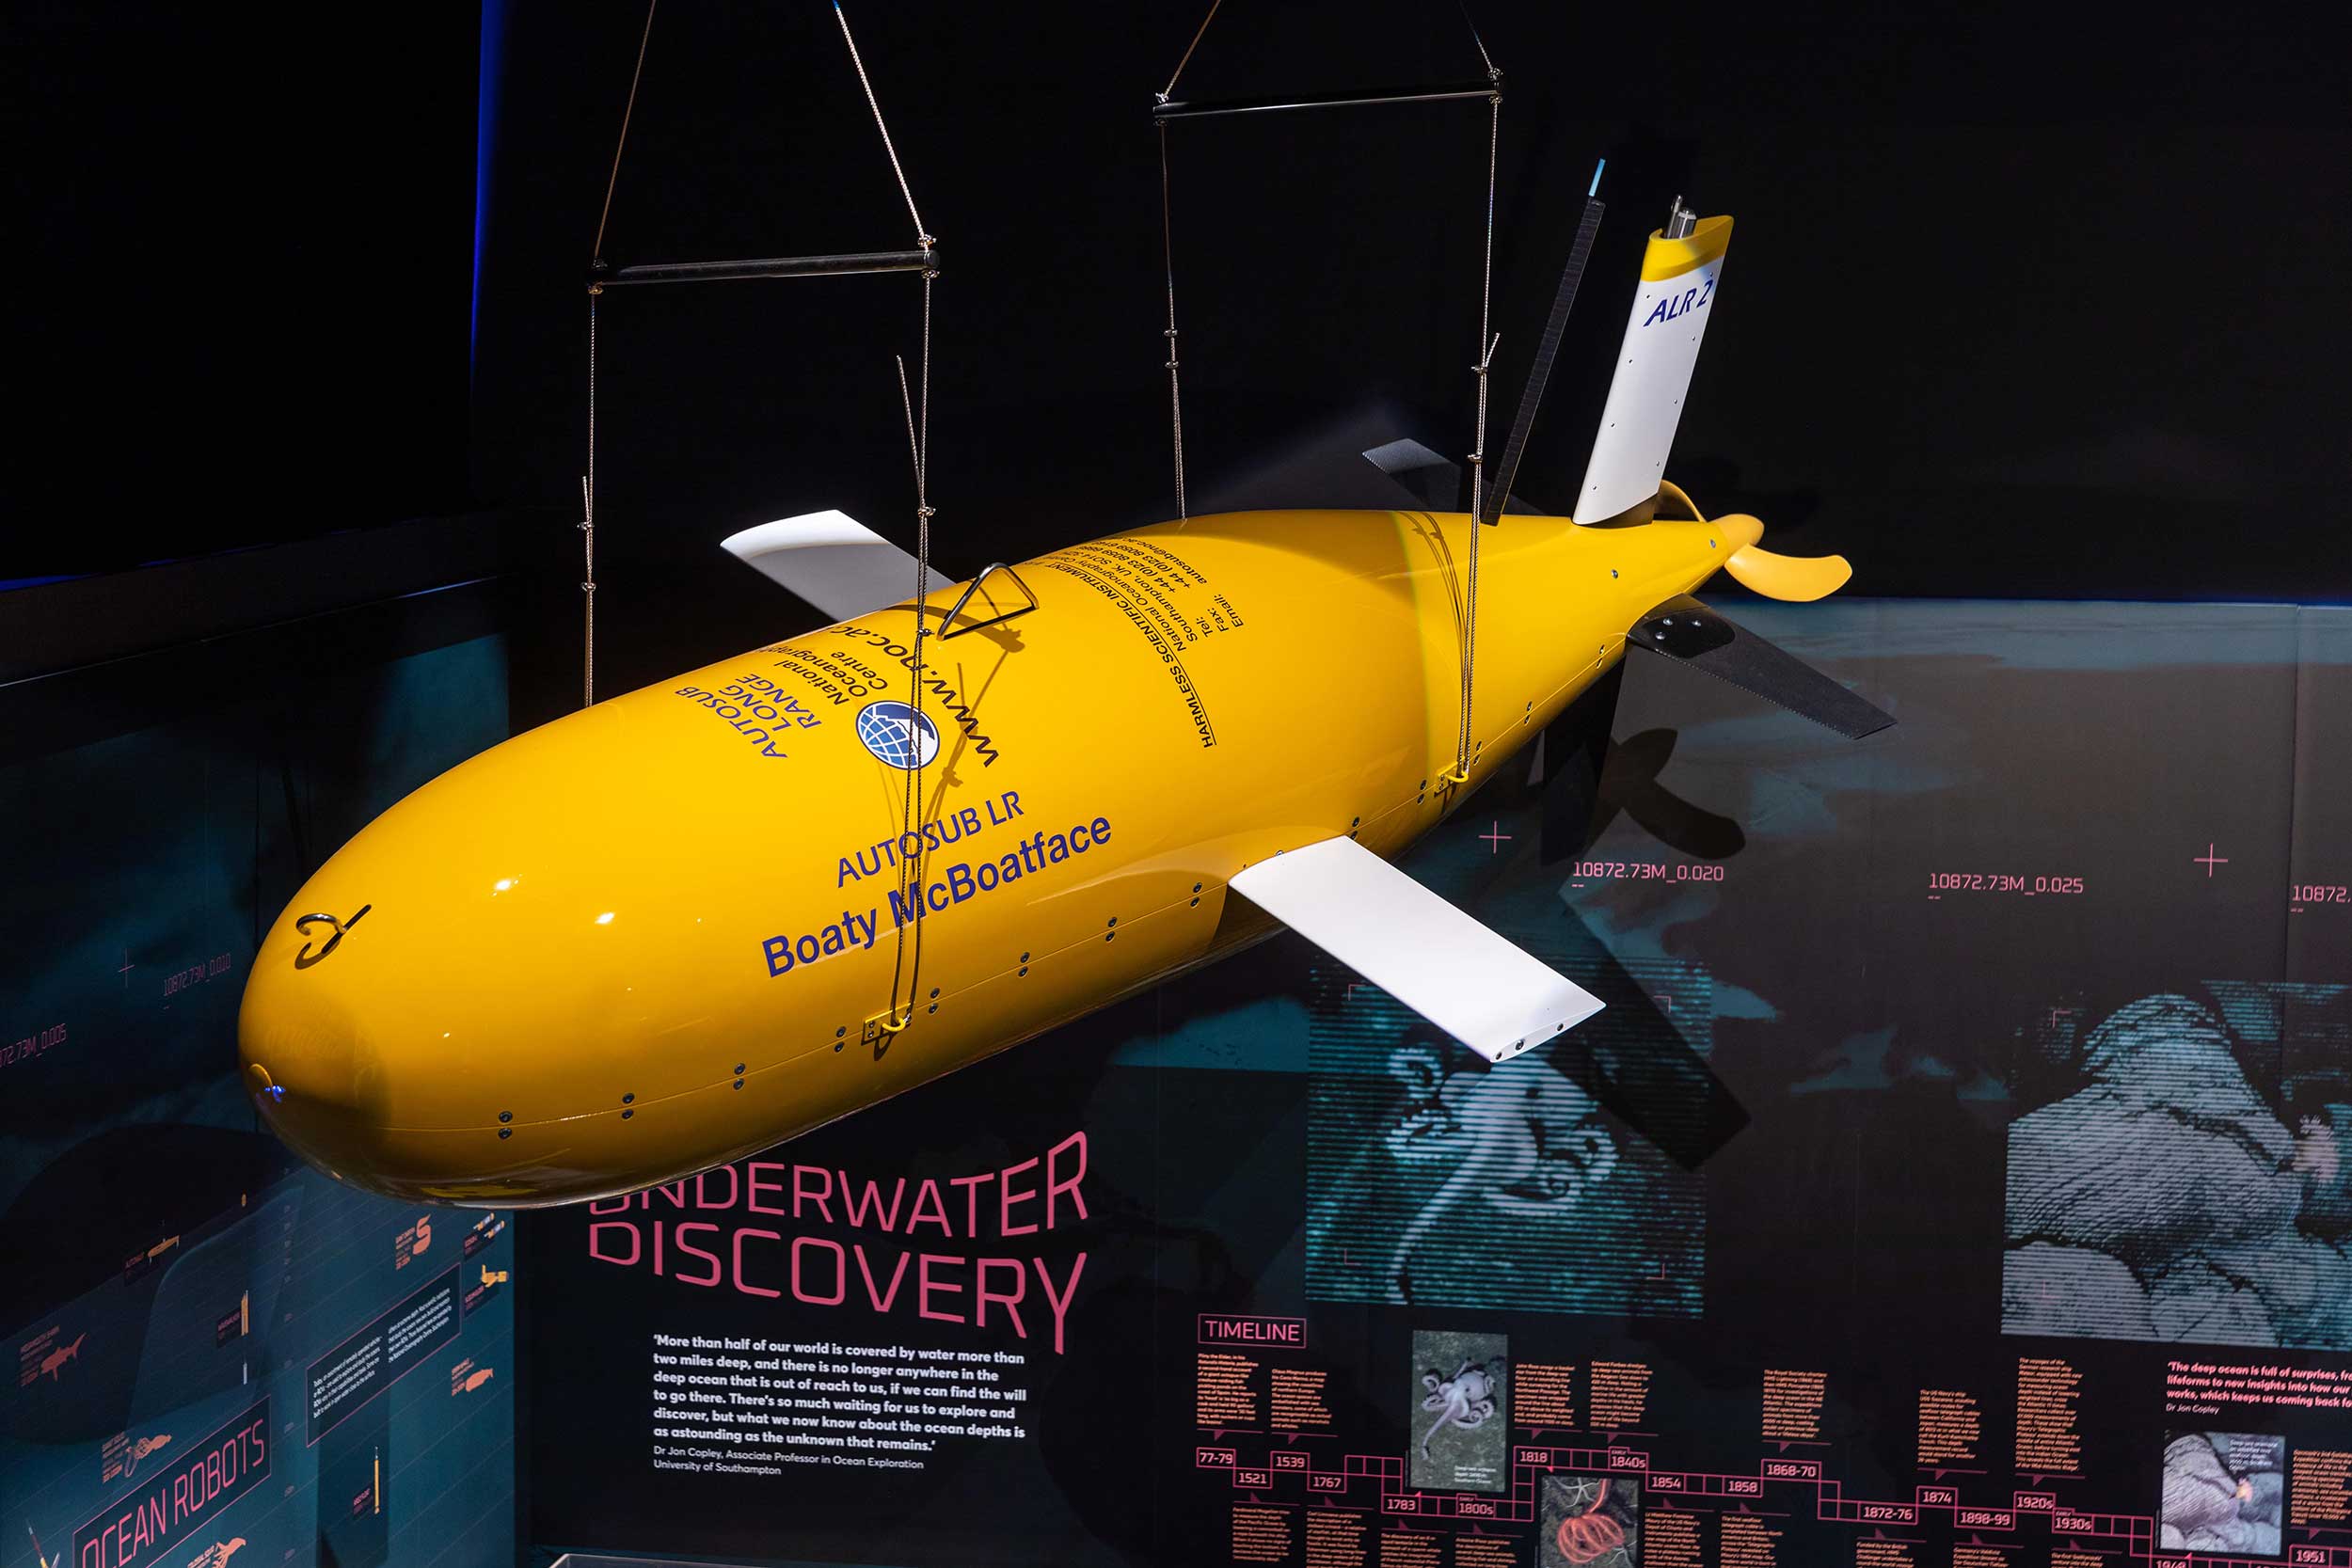 Photo of the model 'Boaty McBoatface' autosub, suspended from the ceiling as part of the Museum's 'Monsters of the Deep' exhibition.